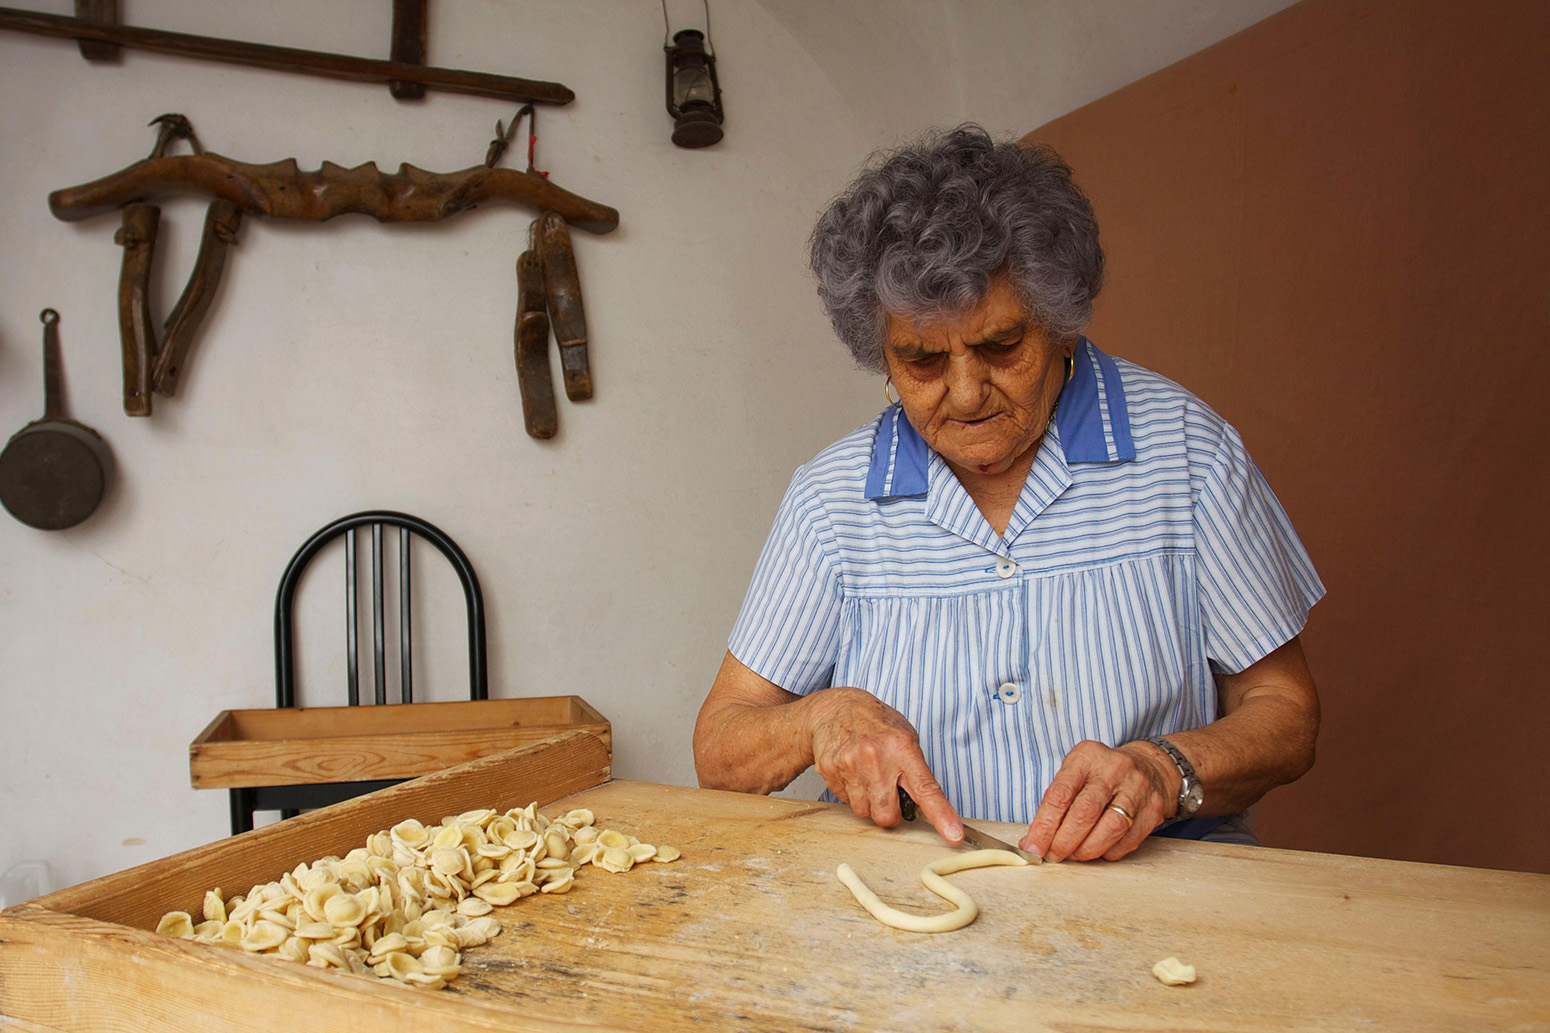 A woman in the Italian region of Puglia makes pasta by hand. Pasta is derived from hard durum wheat. Credit: Hemis / Alamy Stock Photo.